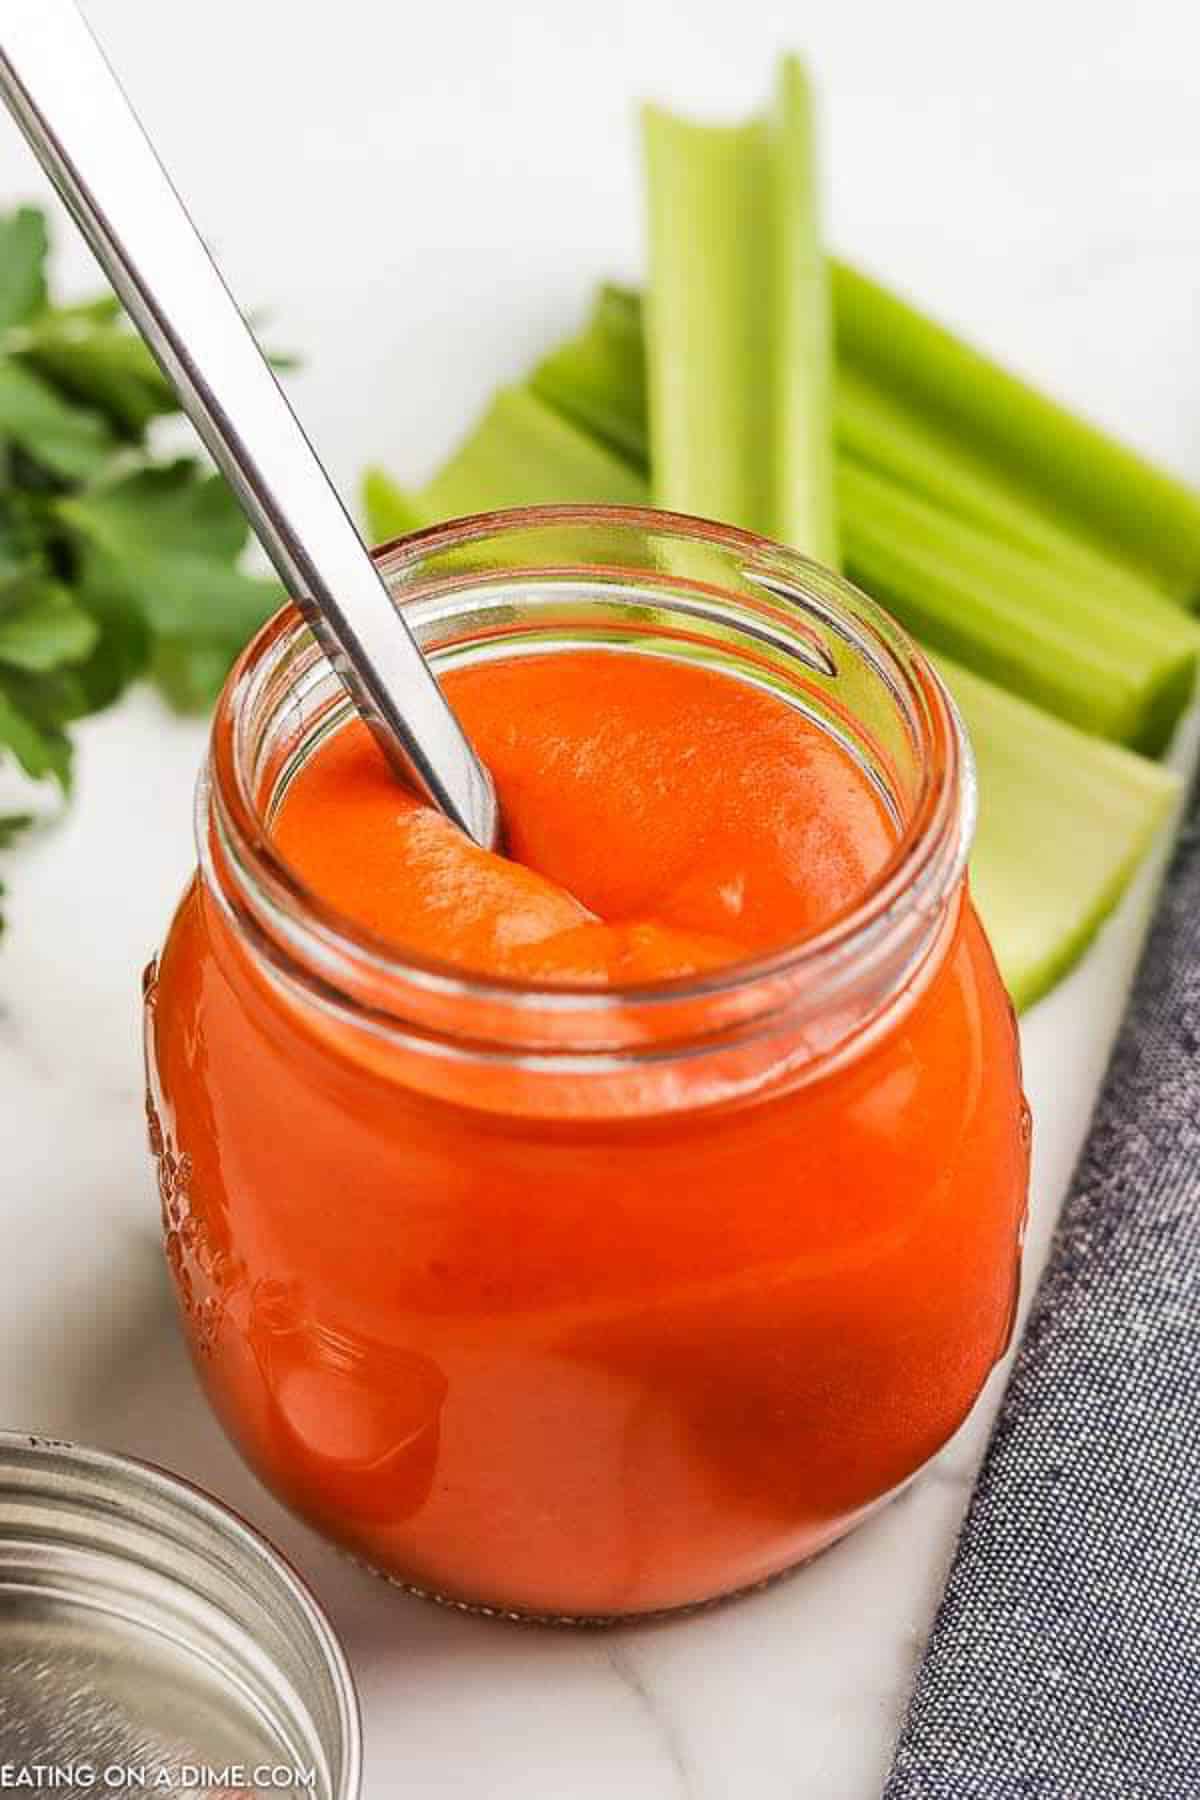 A jar of homemade buffalo sauce with a spoon in the buffalo sauce and with sticks of celery and parsley behind it.  